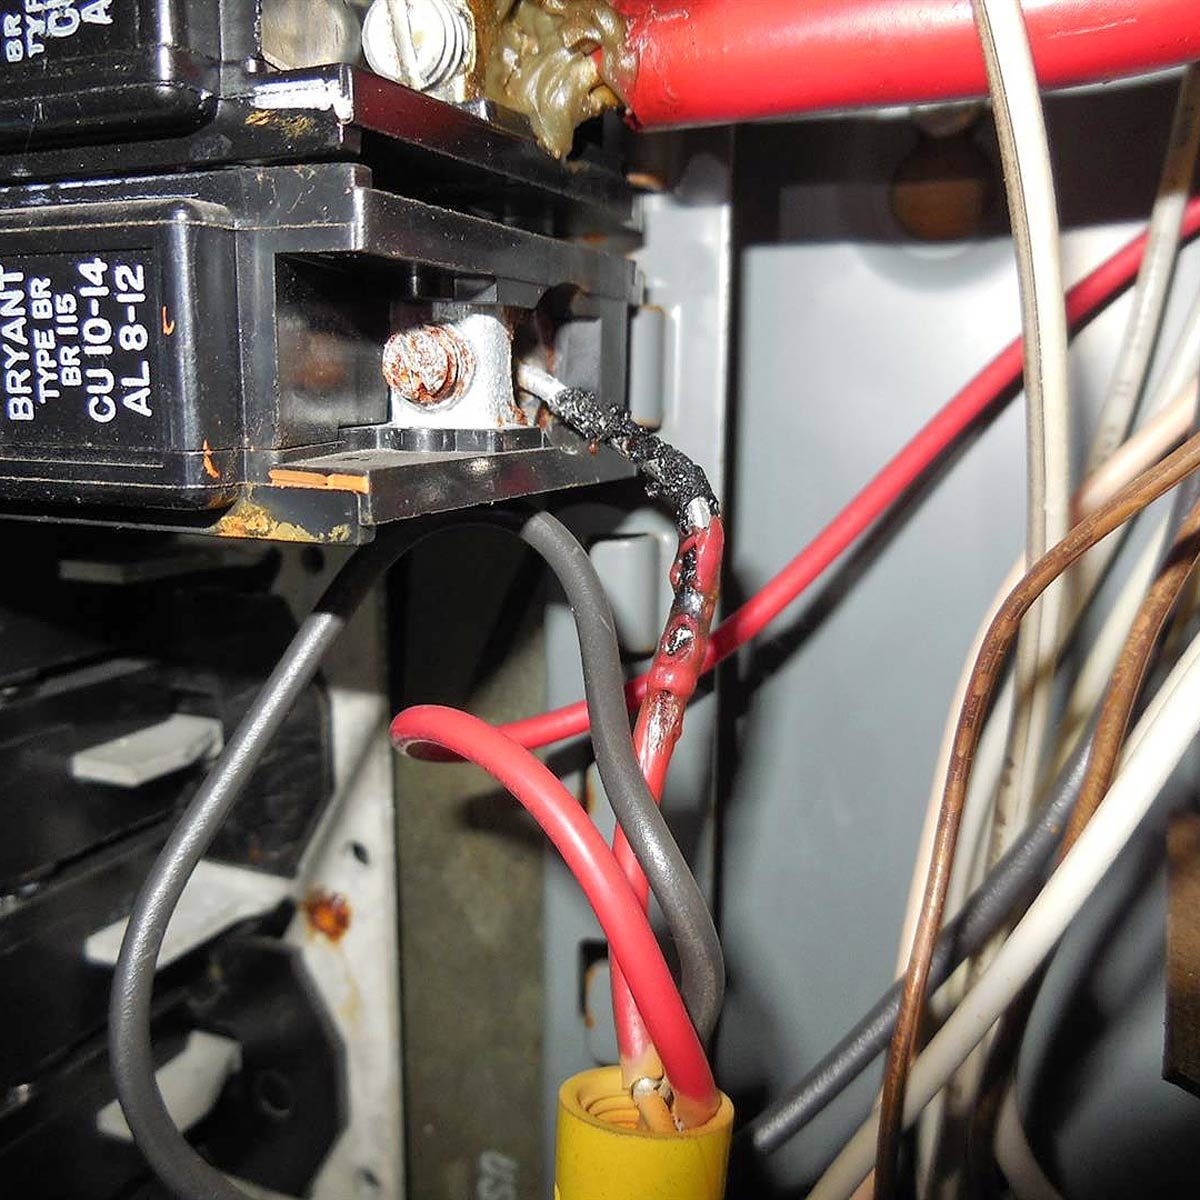 Aluminum Wiring Can Be Hazardous, Here's What to do About It